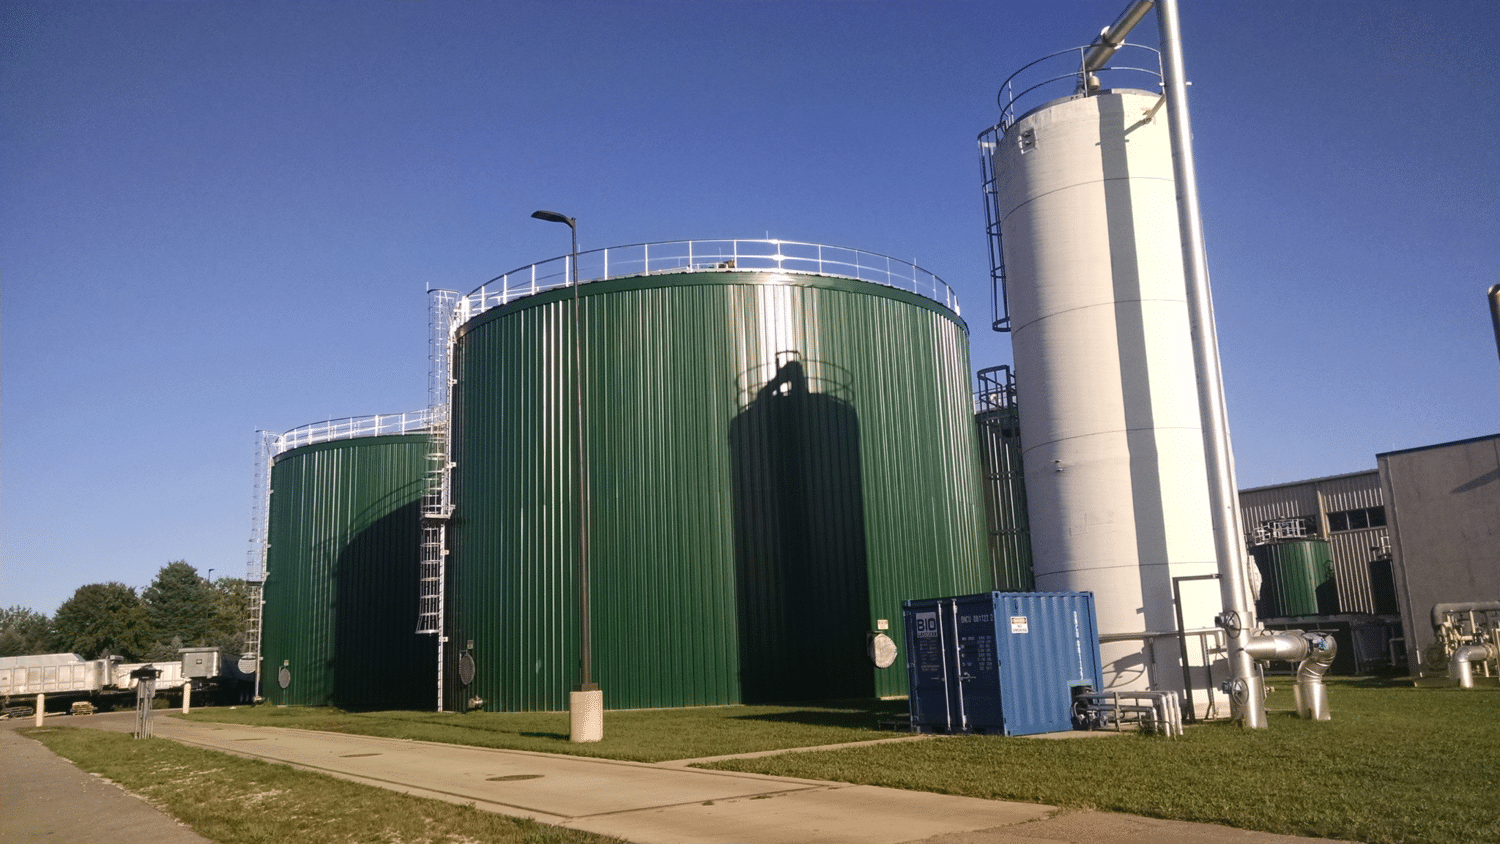 The Fremont Regional Digester found in Michigan, the United States processes food and organic waste. Source: Fremont Regional Digester